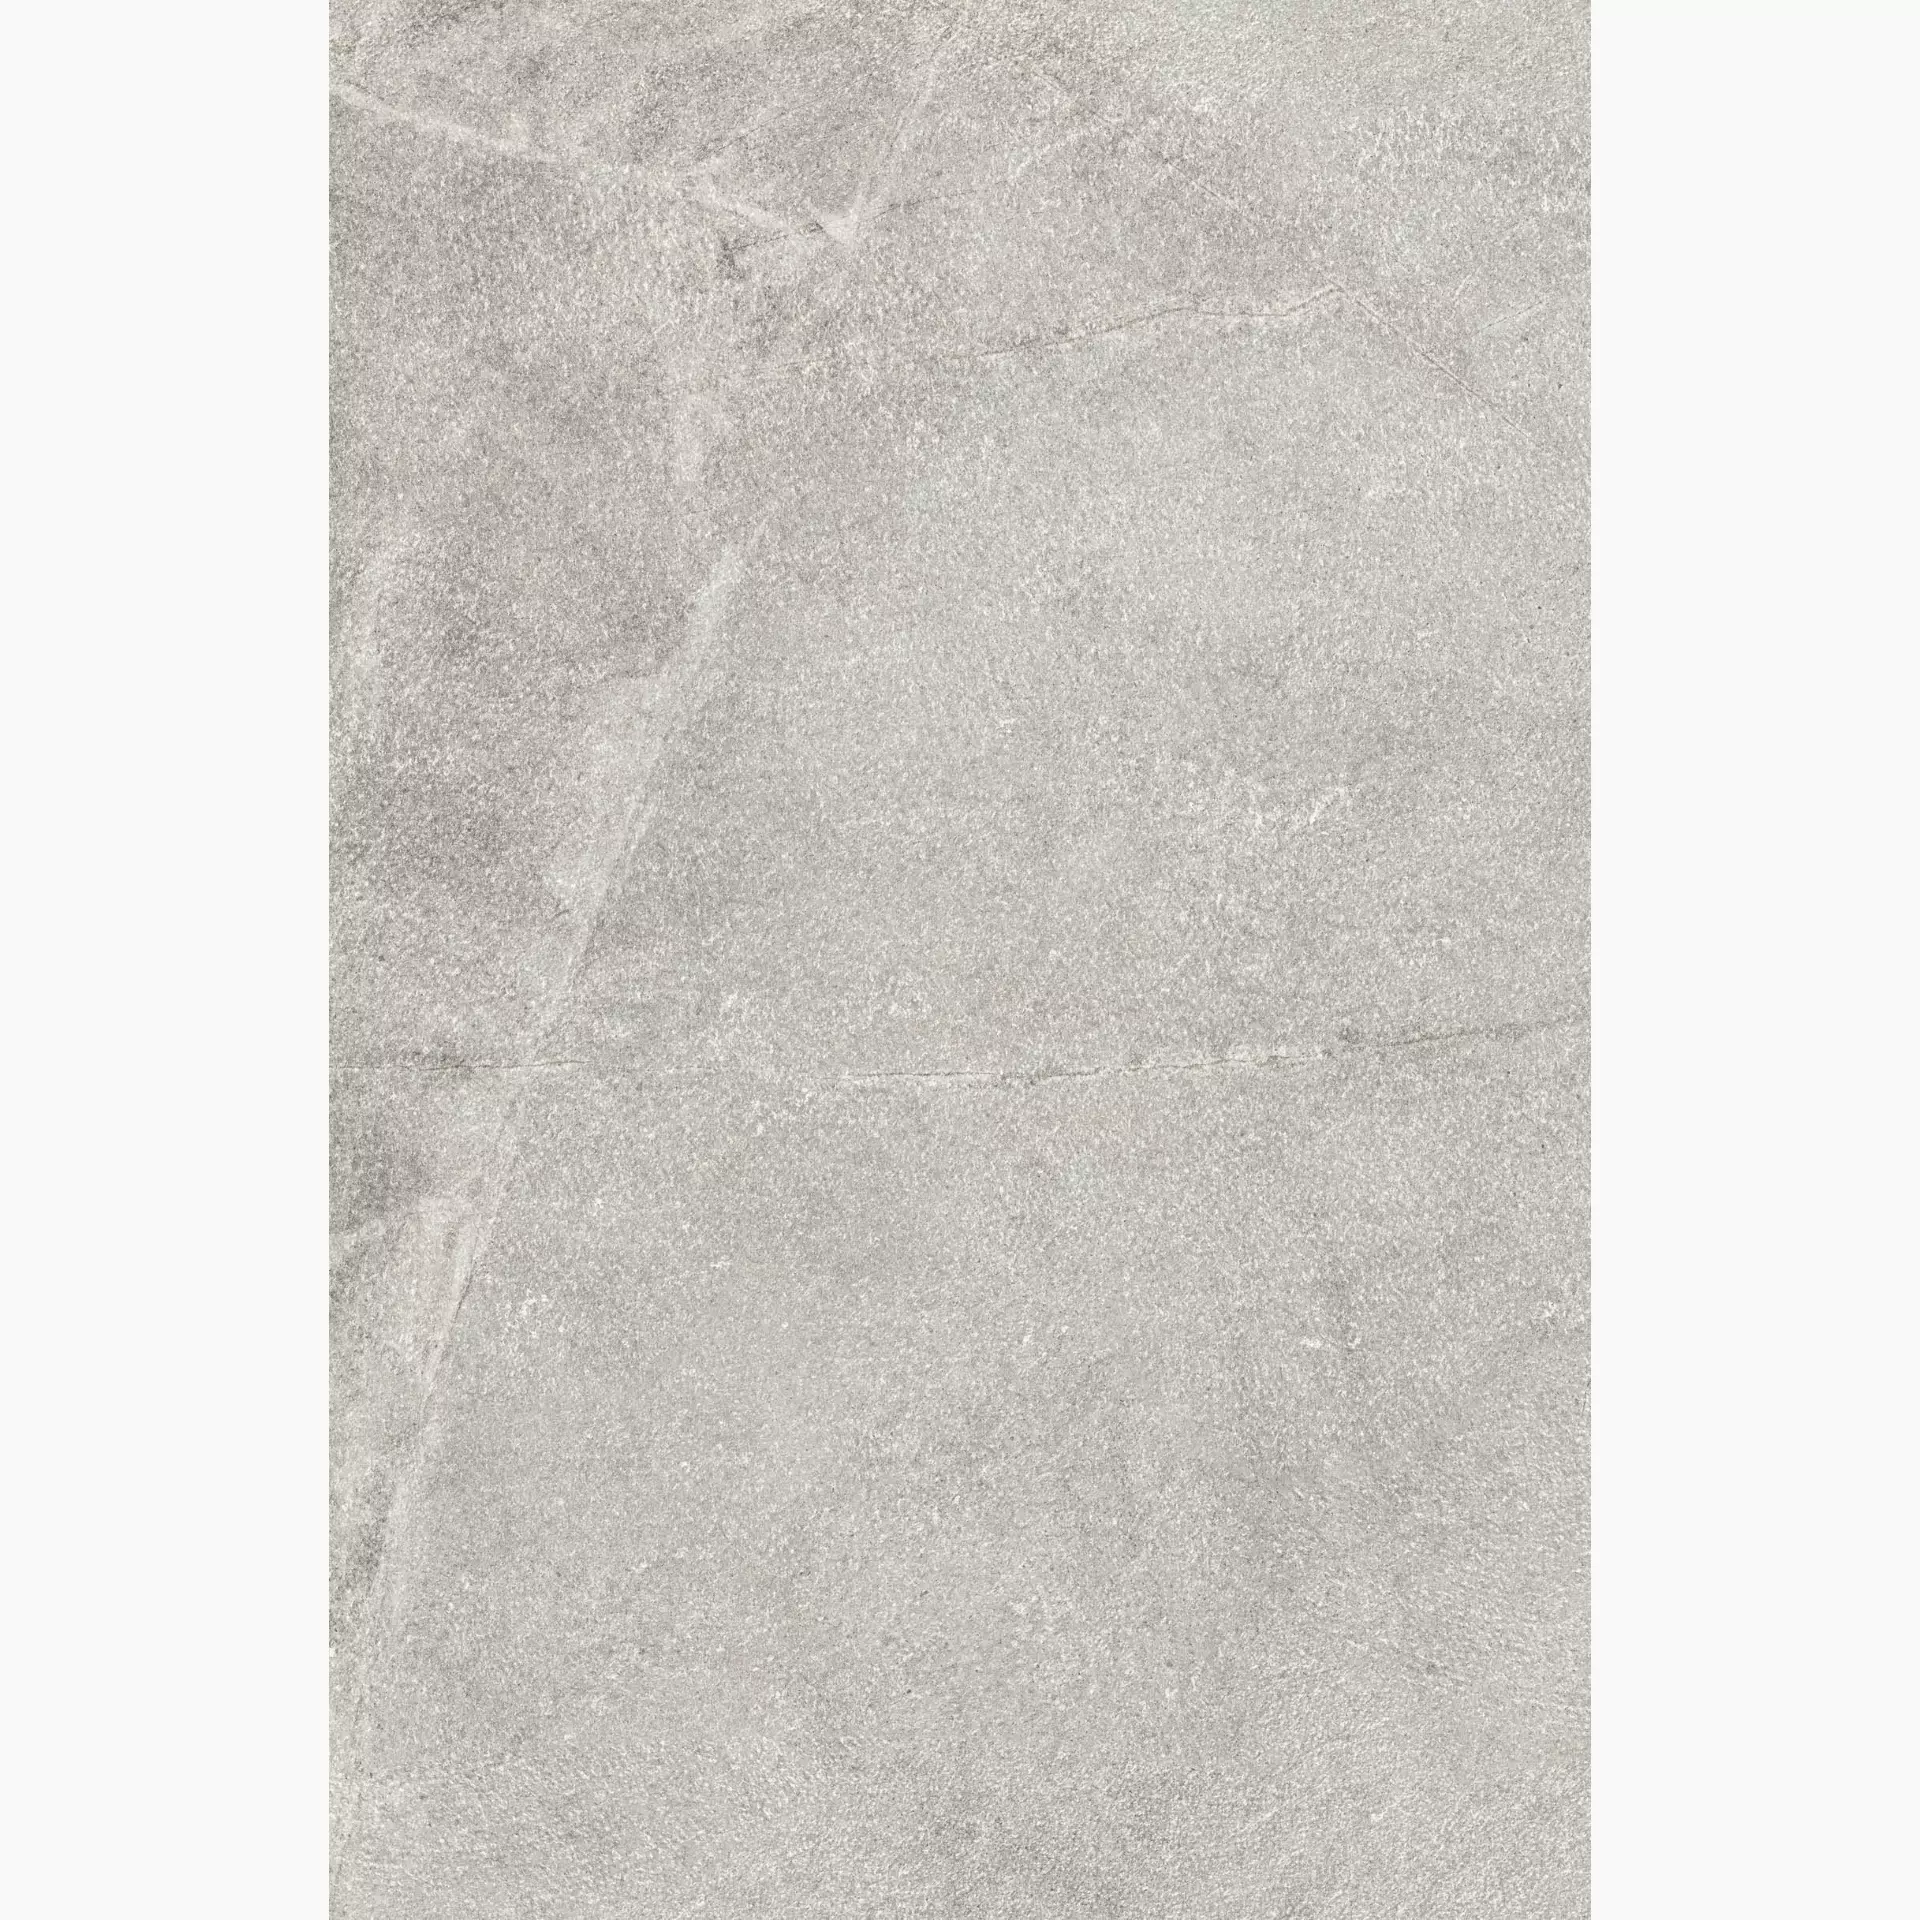 ABK Out.20 Atlantis Moon Hammered - Outdoor PF60007780 60x90cm rectified 20mm